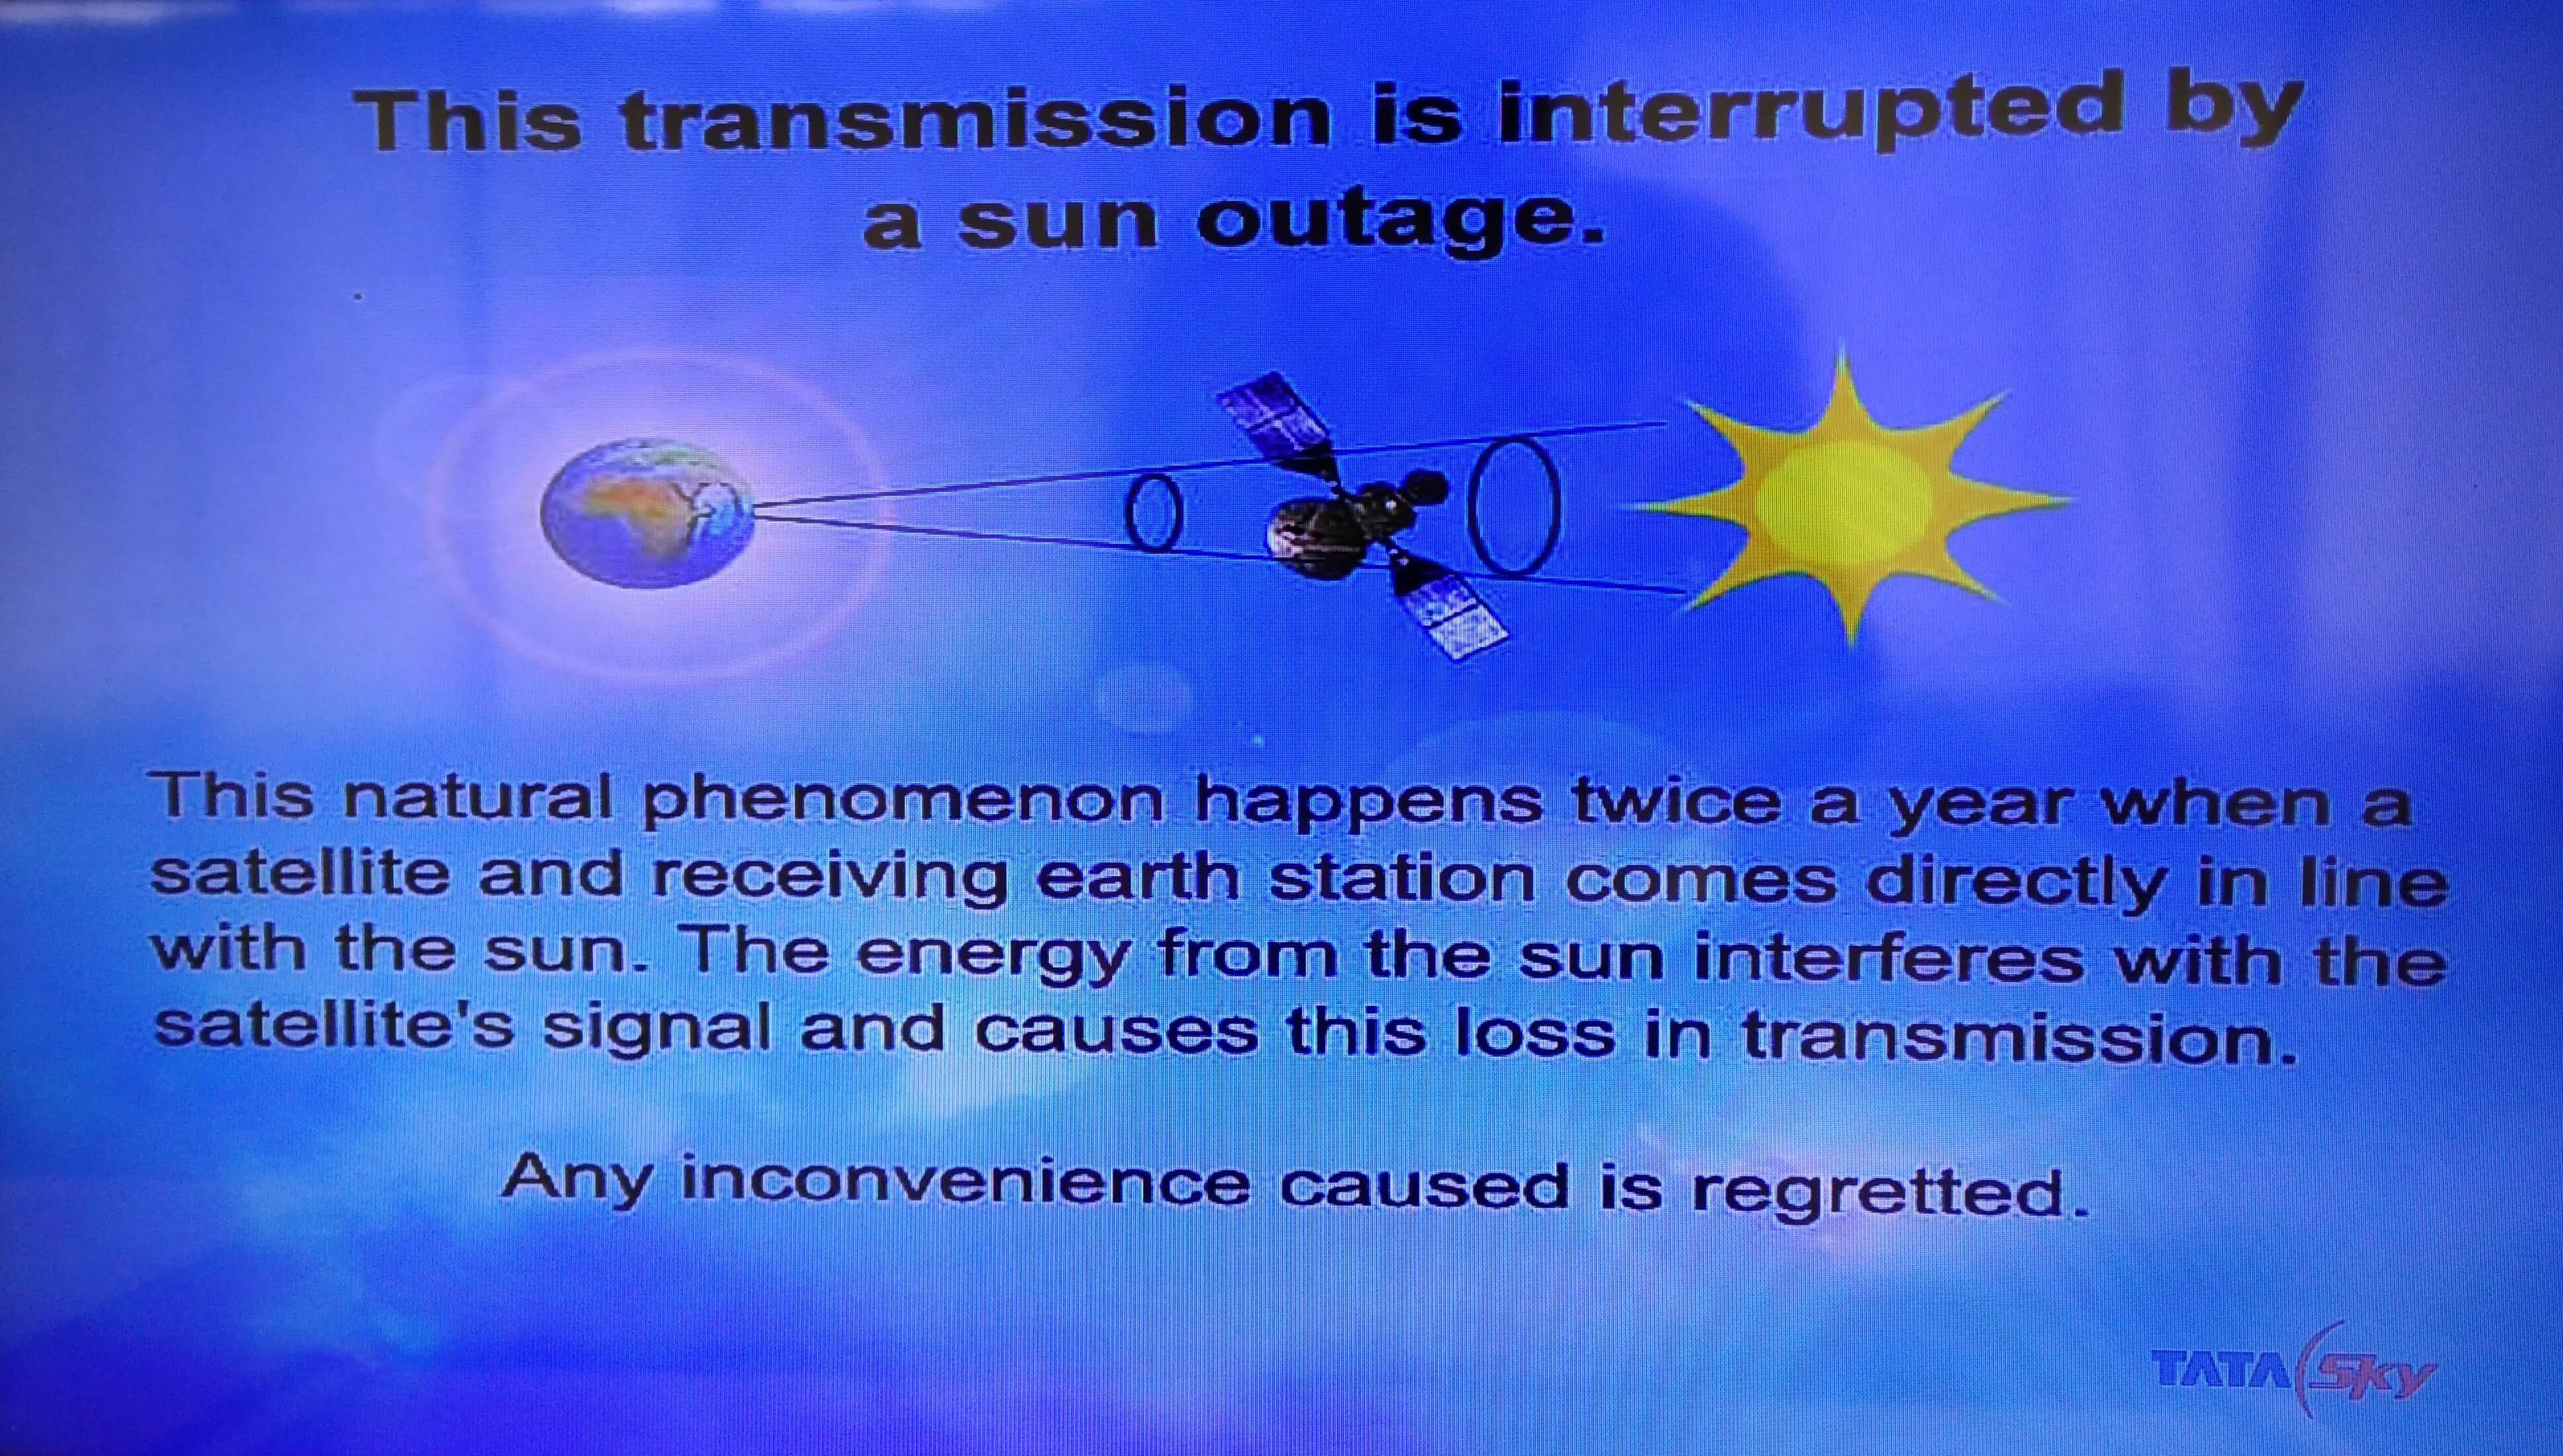 Certain channels facing Sun outage on Tata Sky